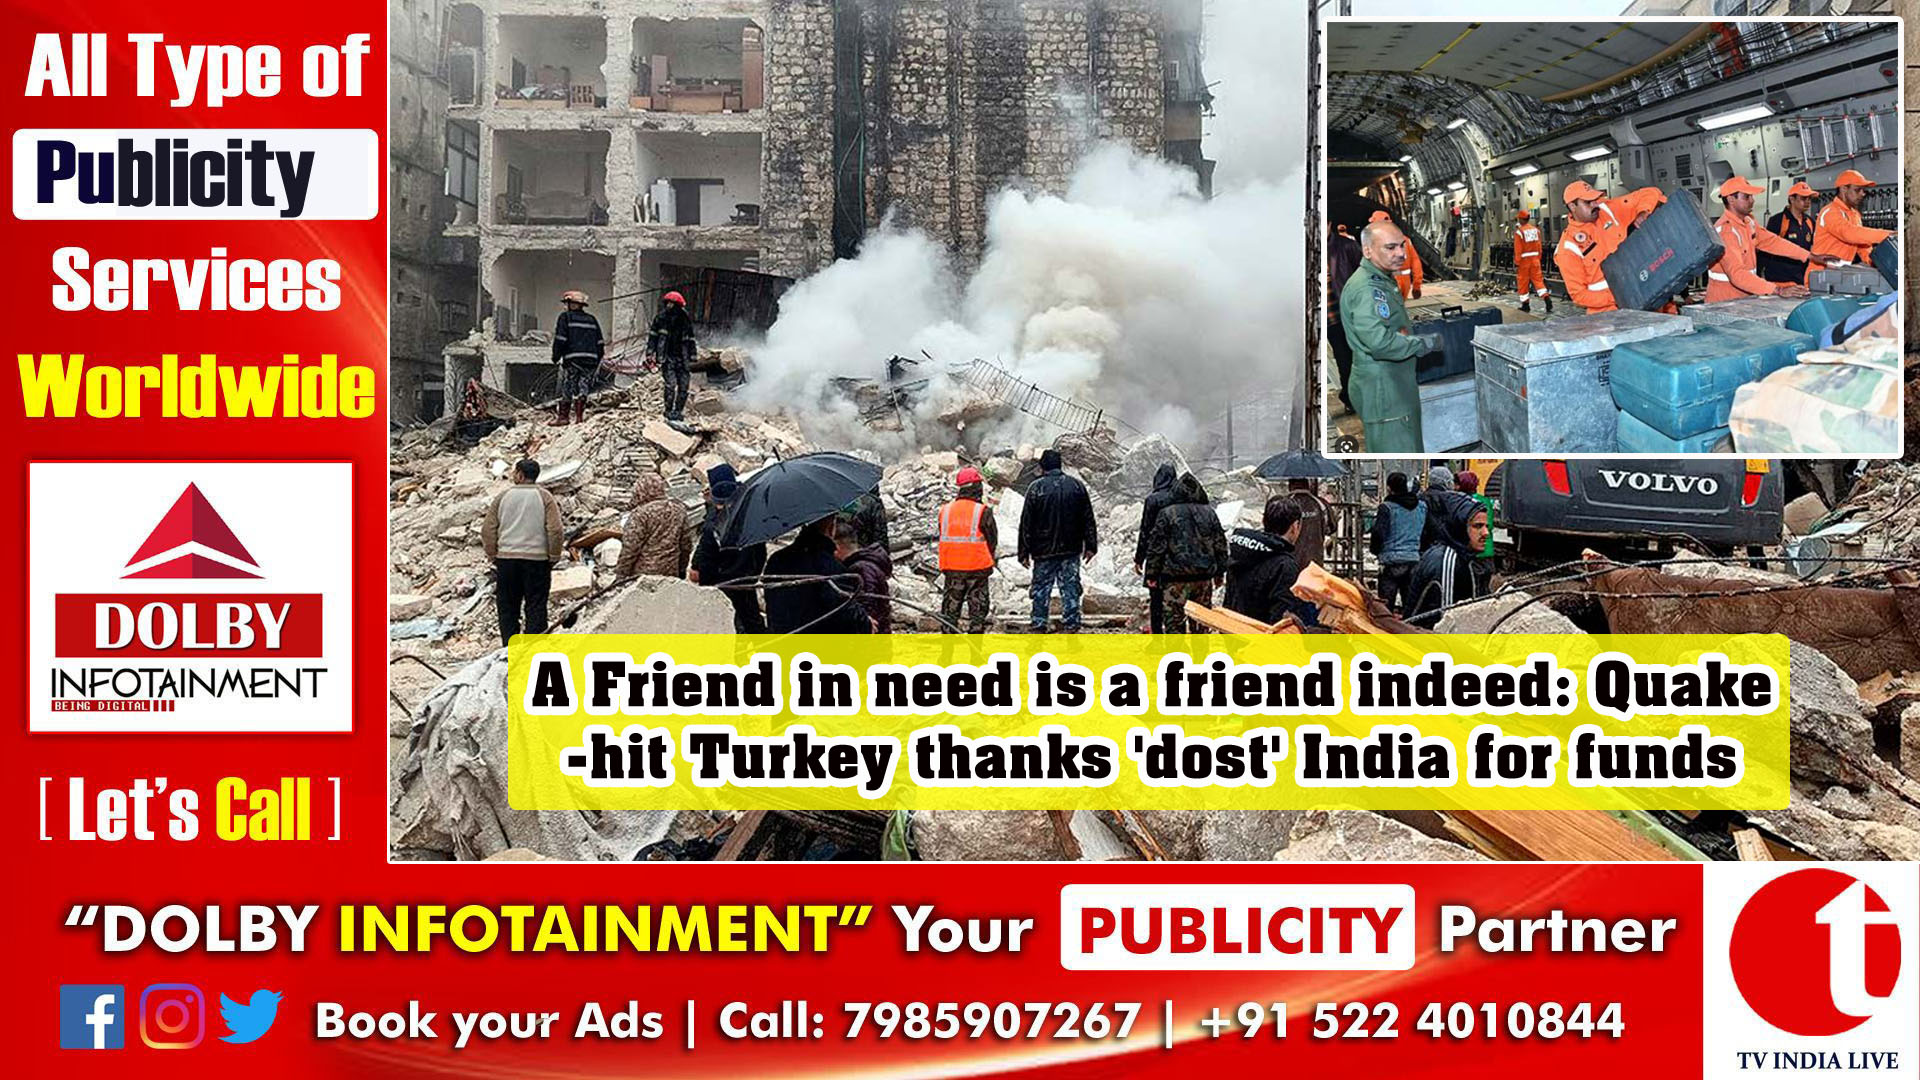 A Friend in need is a friend indeed: Quake-hit Turkey thanks 'dost' India for funds